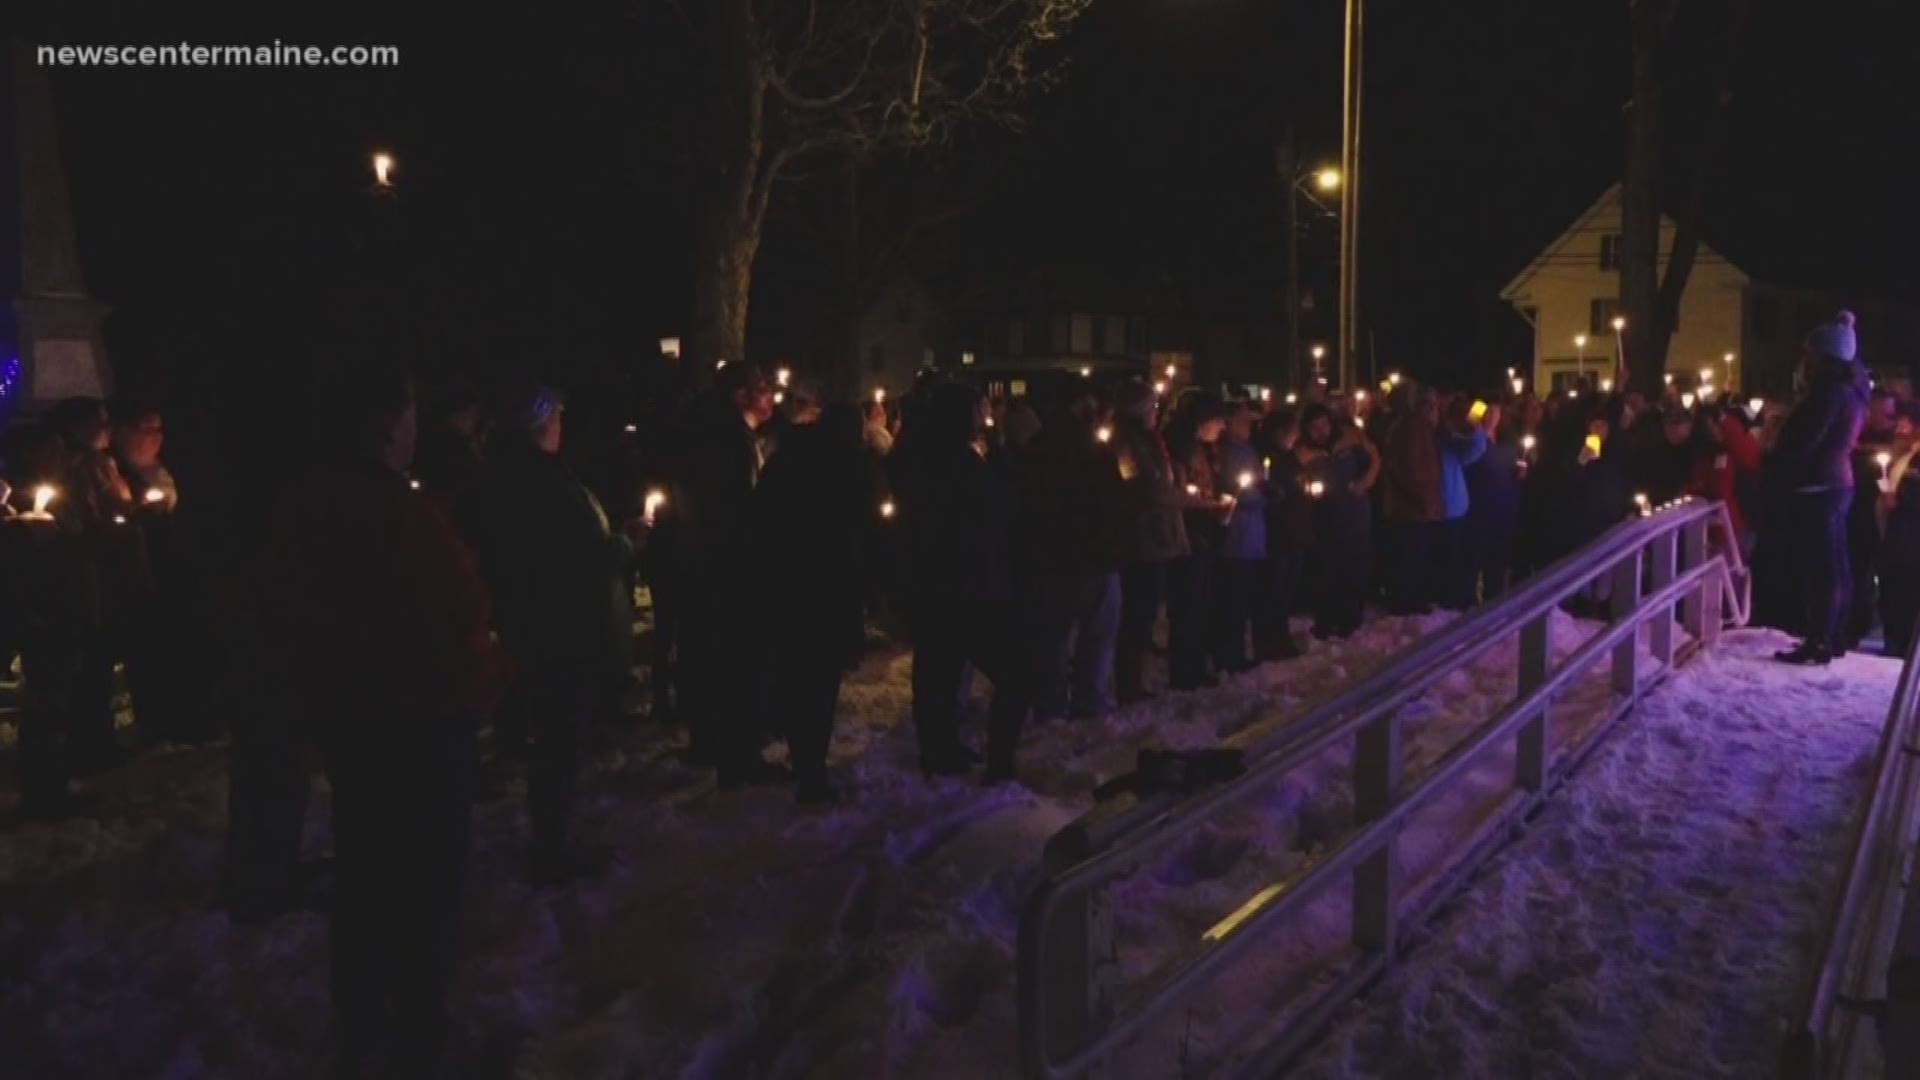 Family, friends and community members grieve together over the loss of South Paris couple.